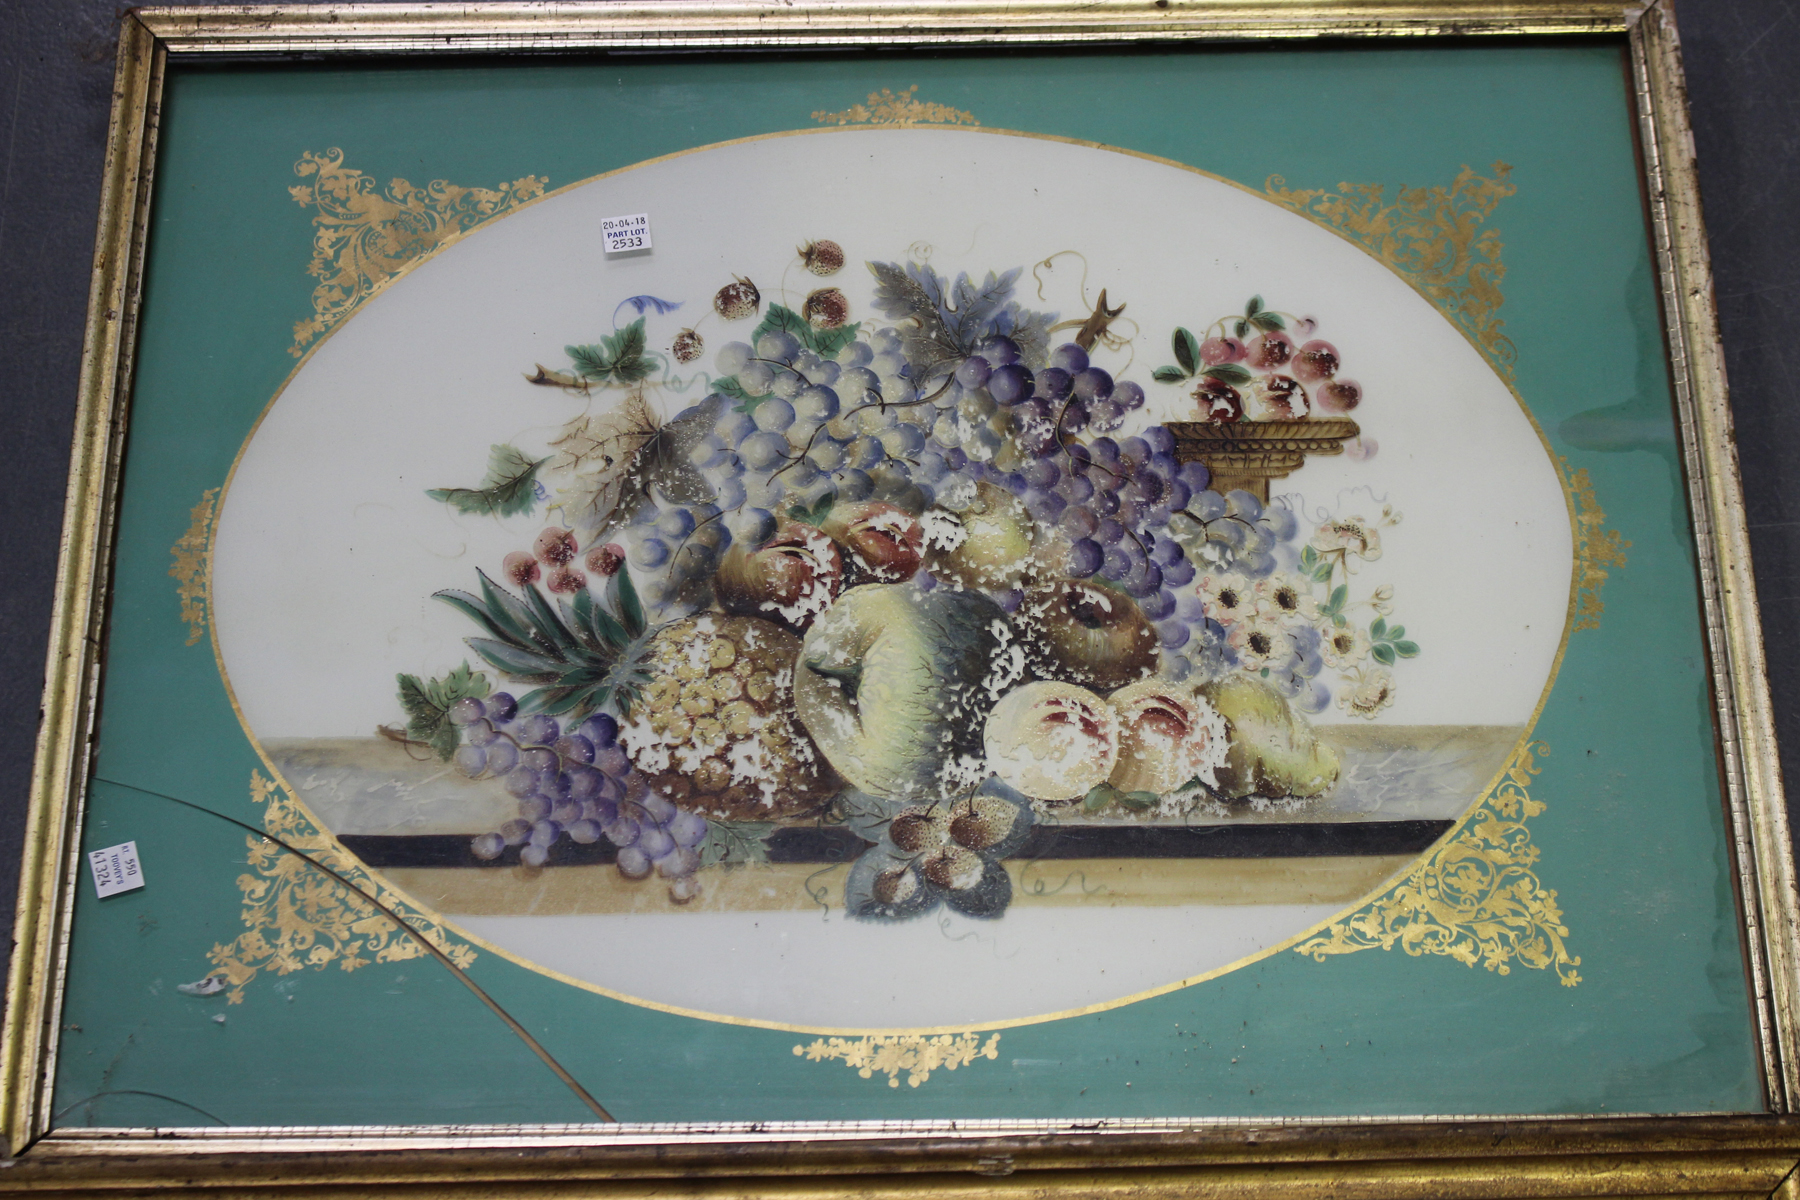 A 19th century French reverse painting on glass depicting a still life within a gilded strapwork - Image 2 of 2